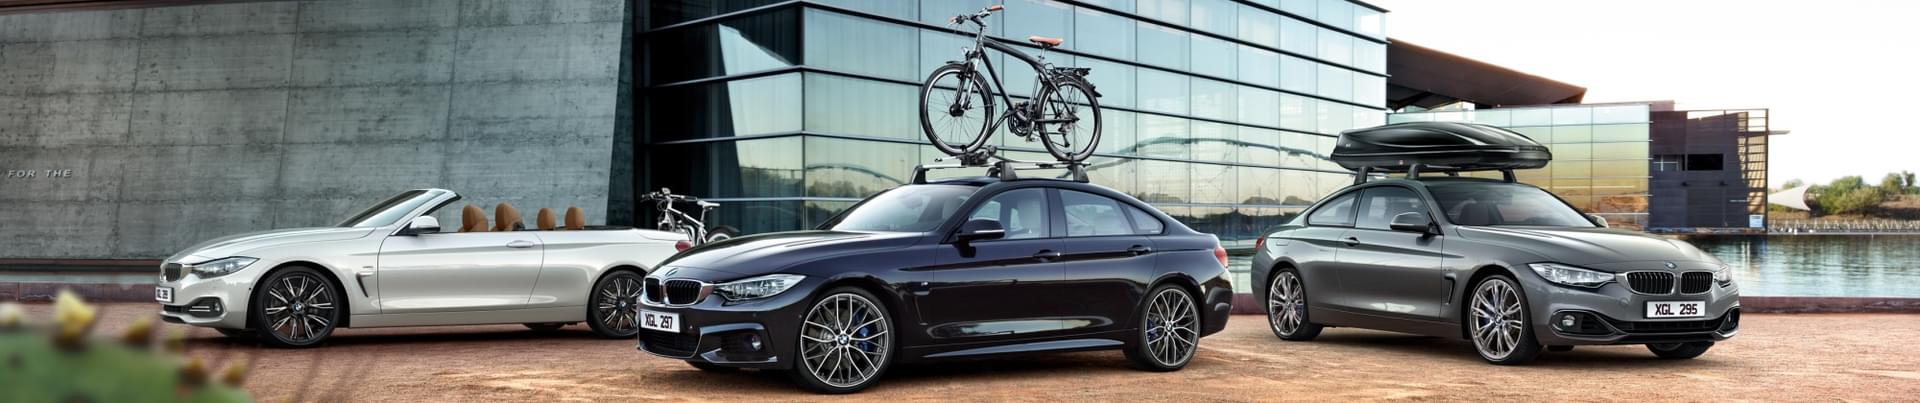 BMW Accessory Pack Range from Listers